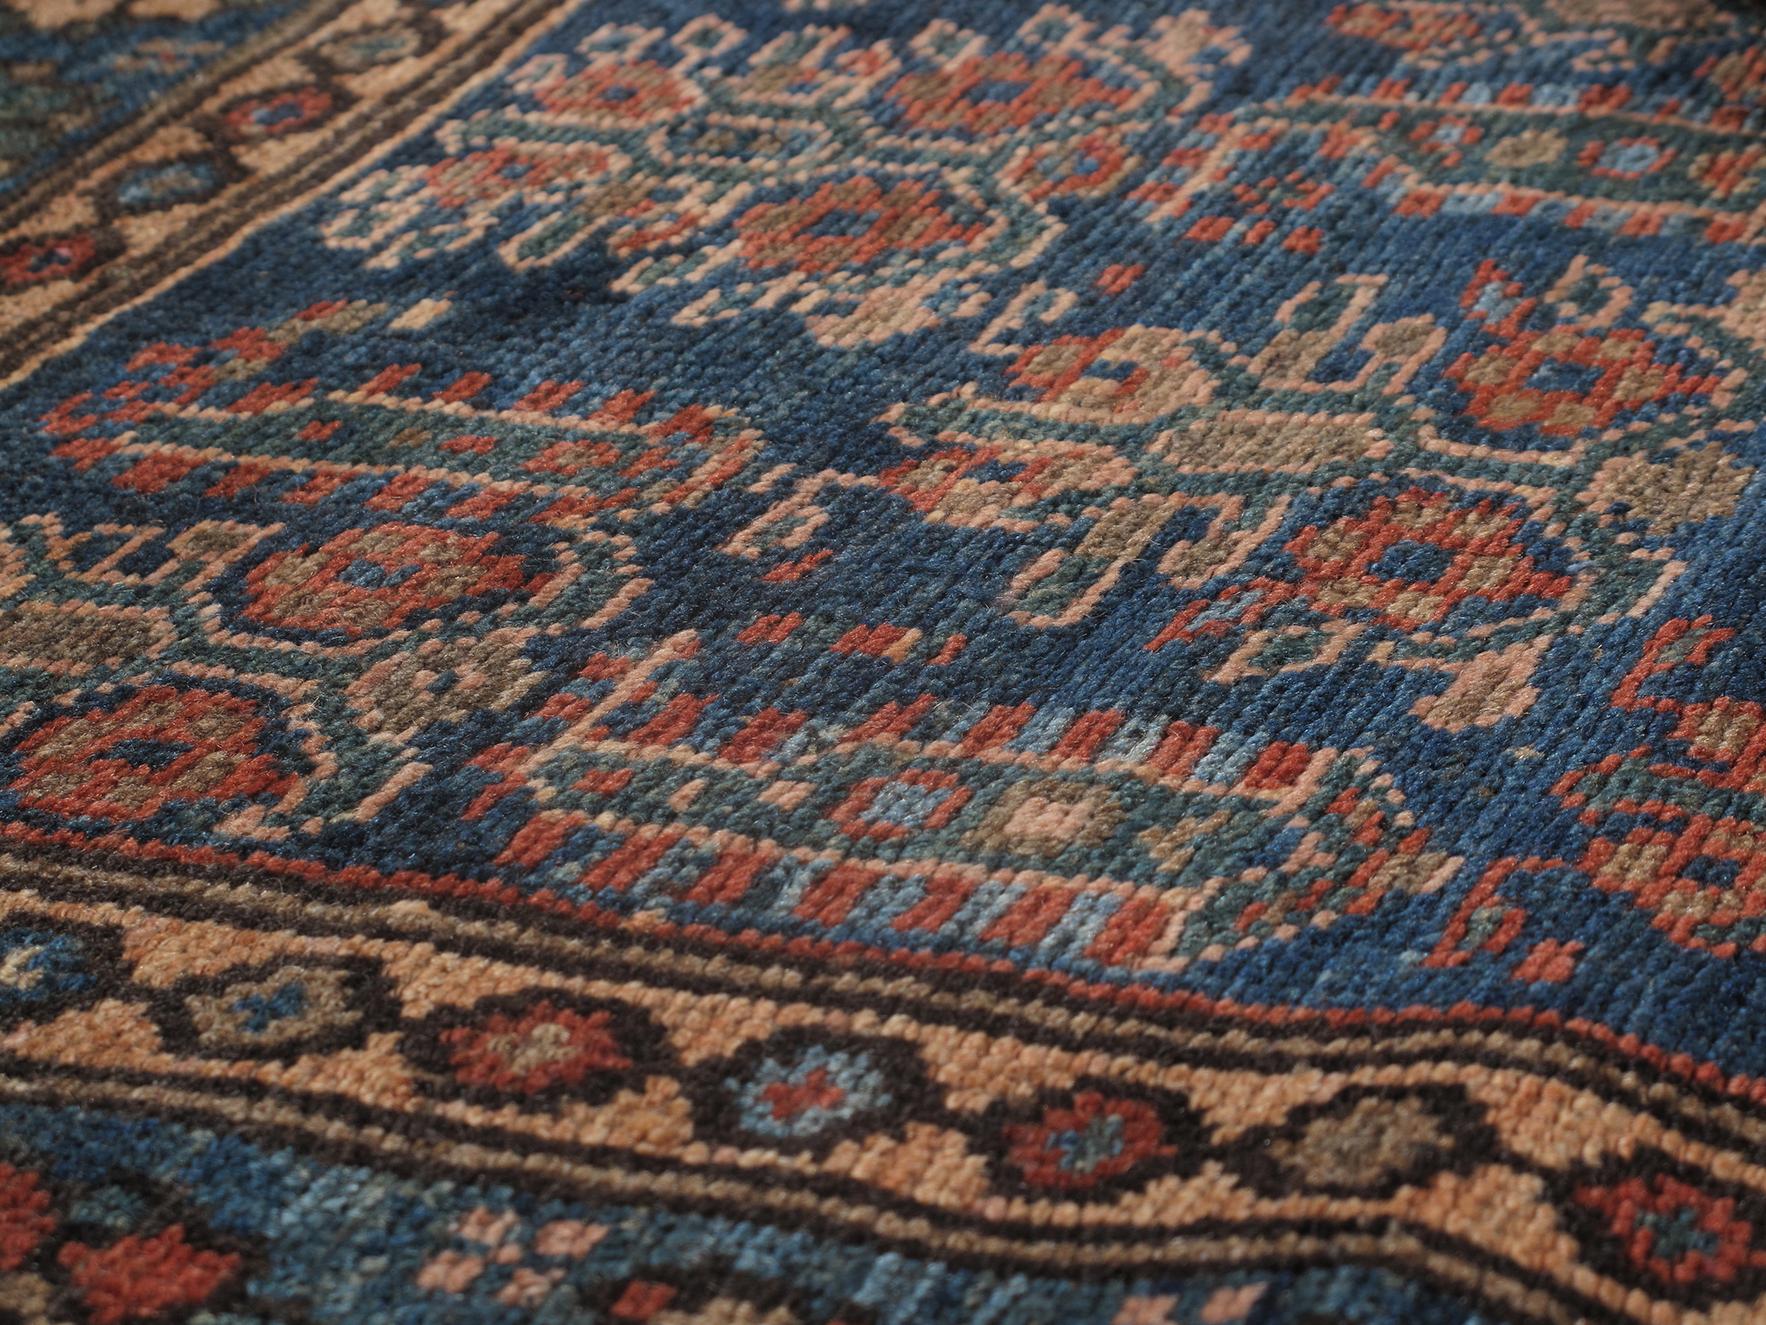 This antique Persian Kuridsh rug is skillfully sourced by N A S I R I through extensive travel, passion, and research. Kurdish rugs are named after a major rug weaving village in central west Iran. The village was known for producing extremely fine